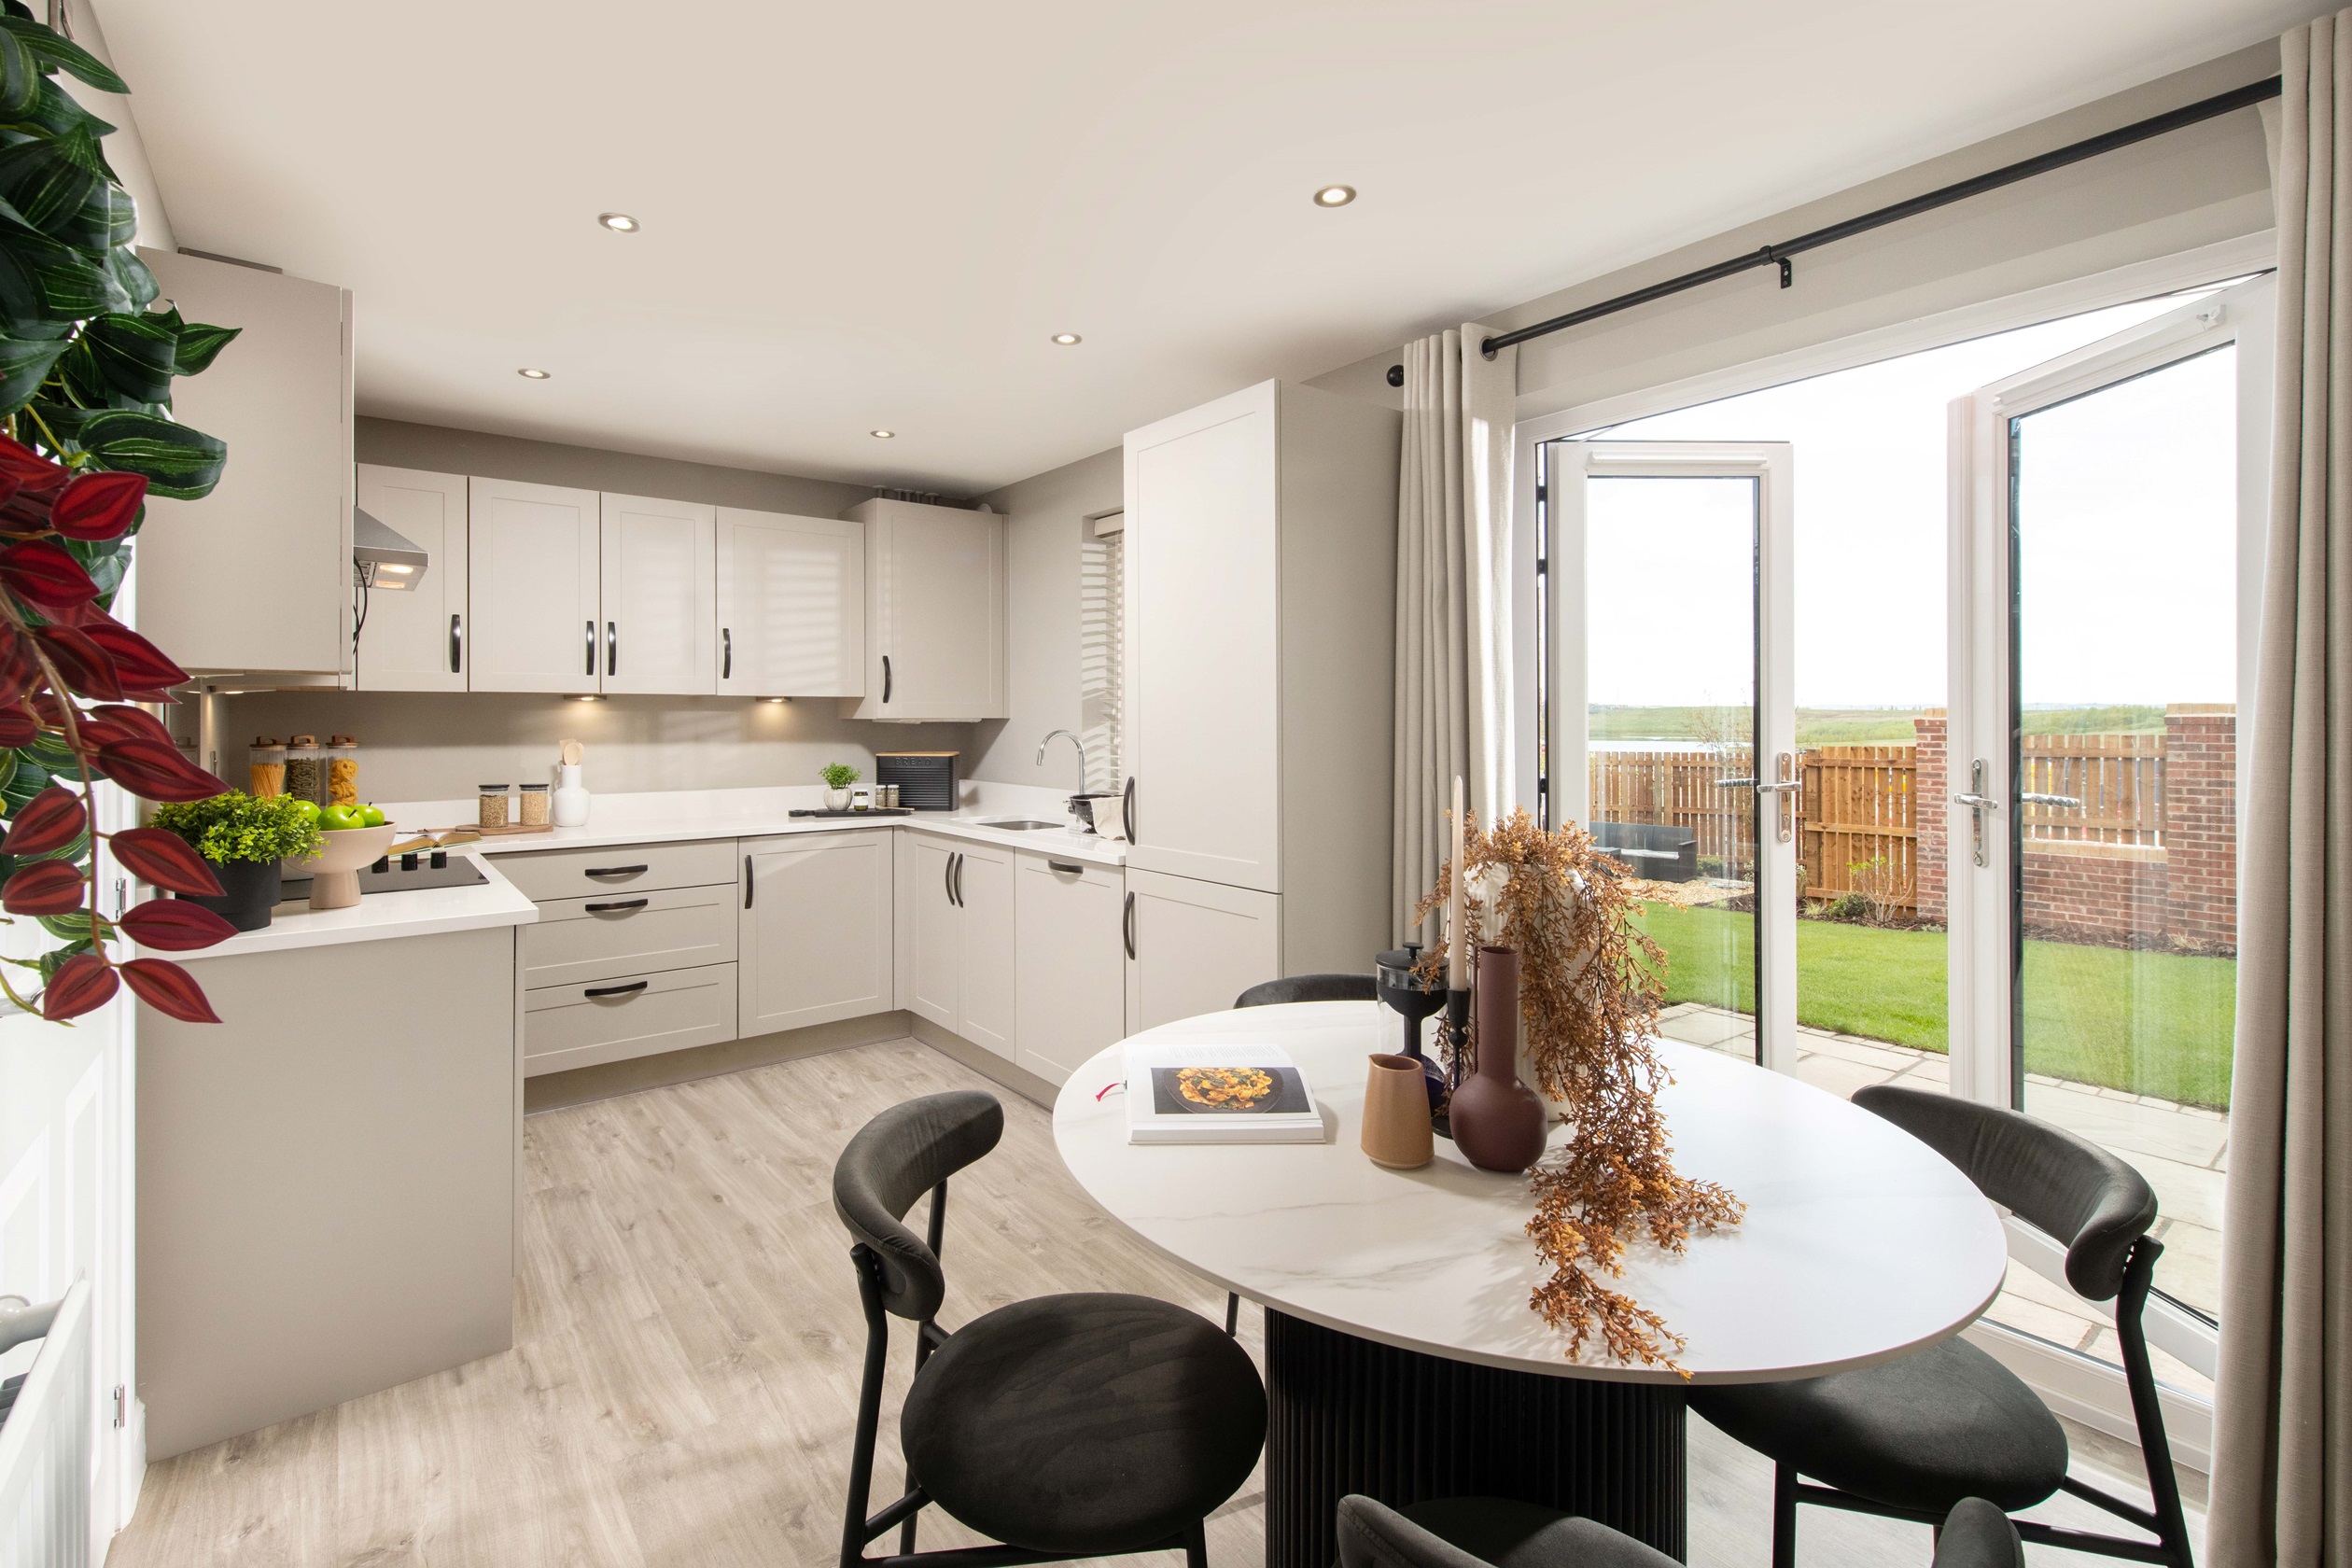 Property 2 of 9. Bar Yw Affinity Moresby Show Home